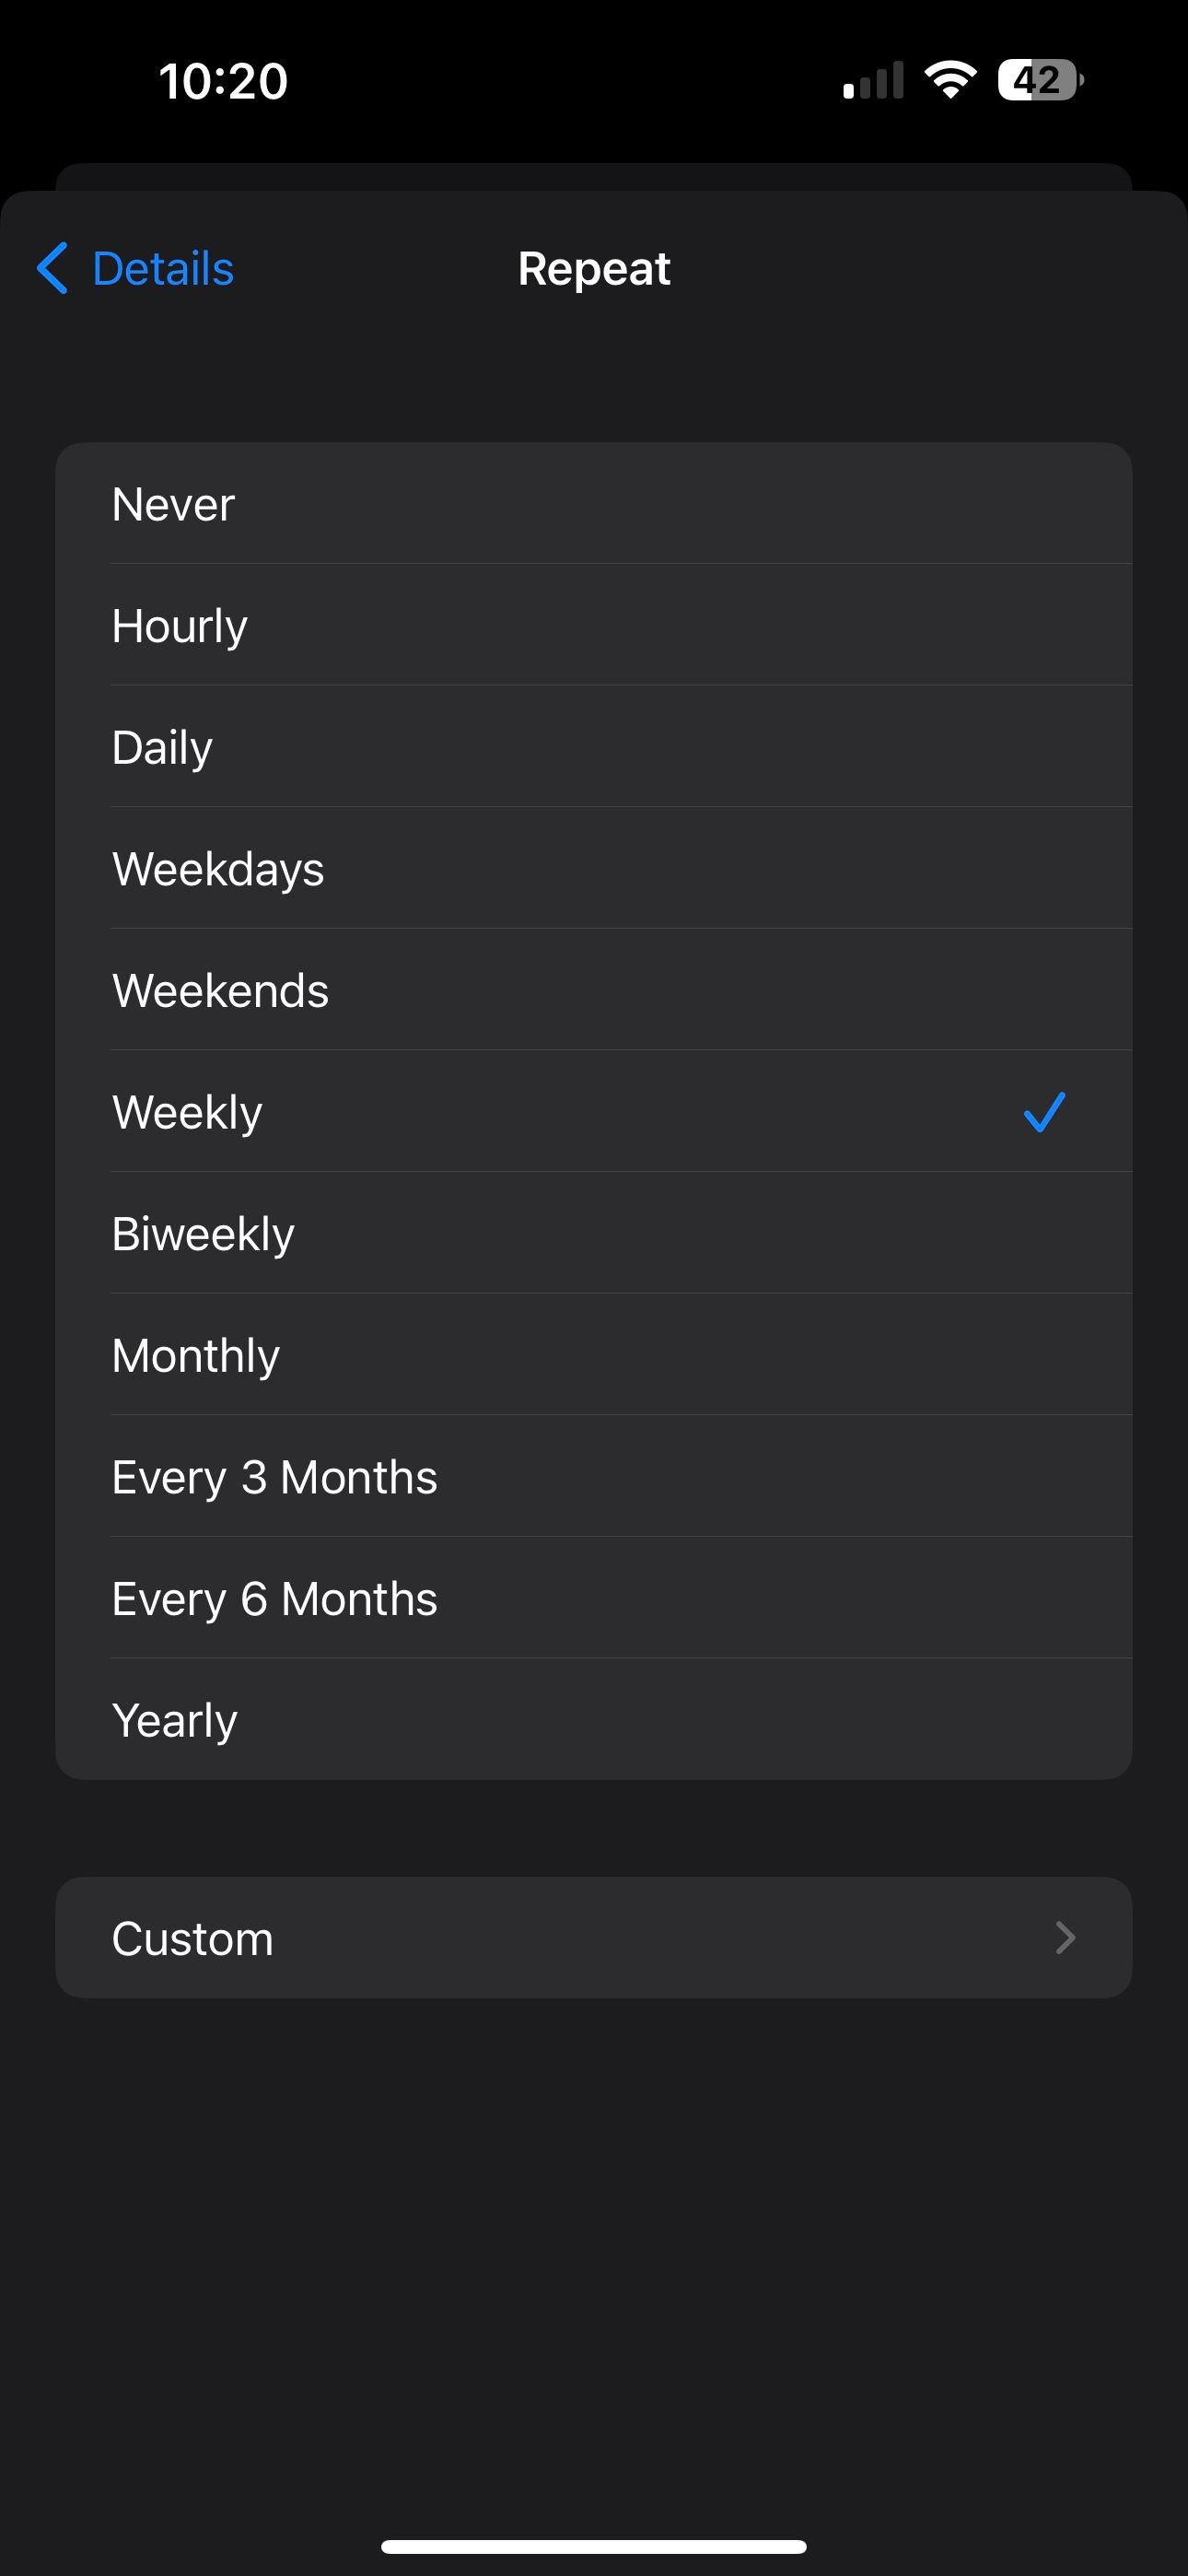 Repeat settings with Weekly selected